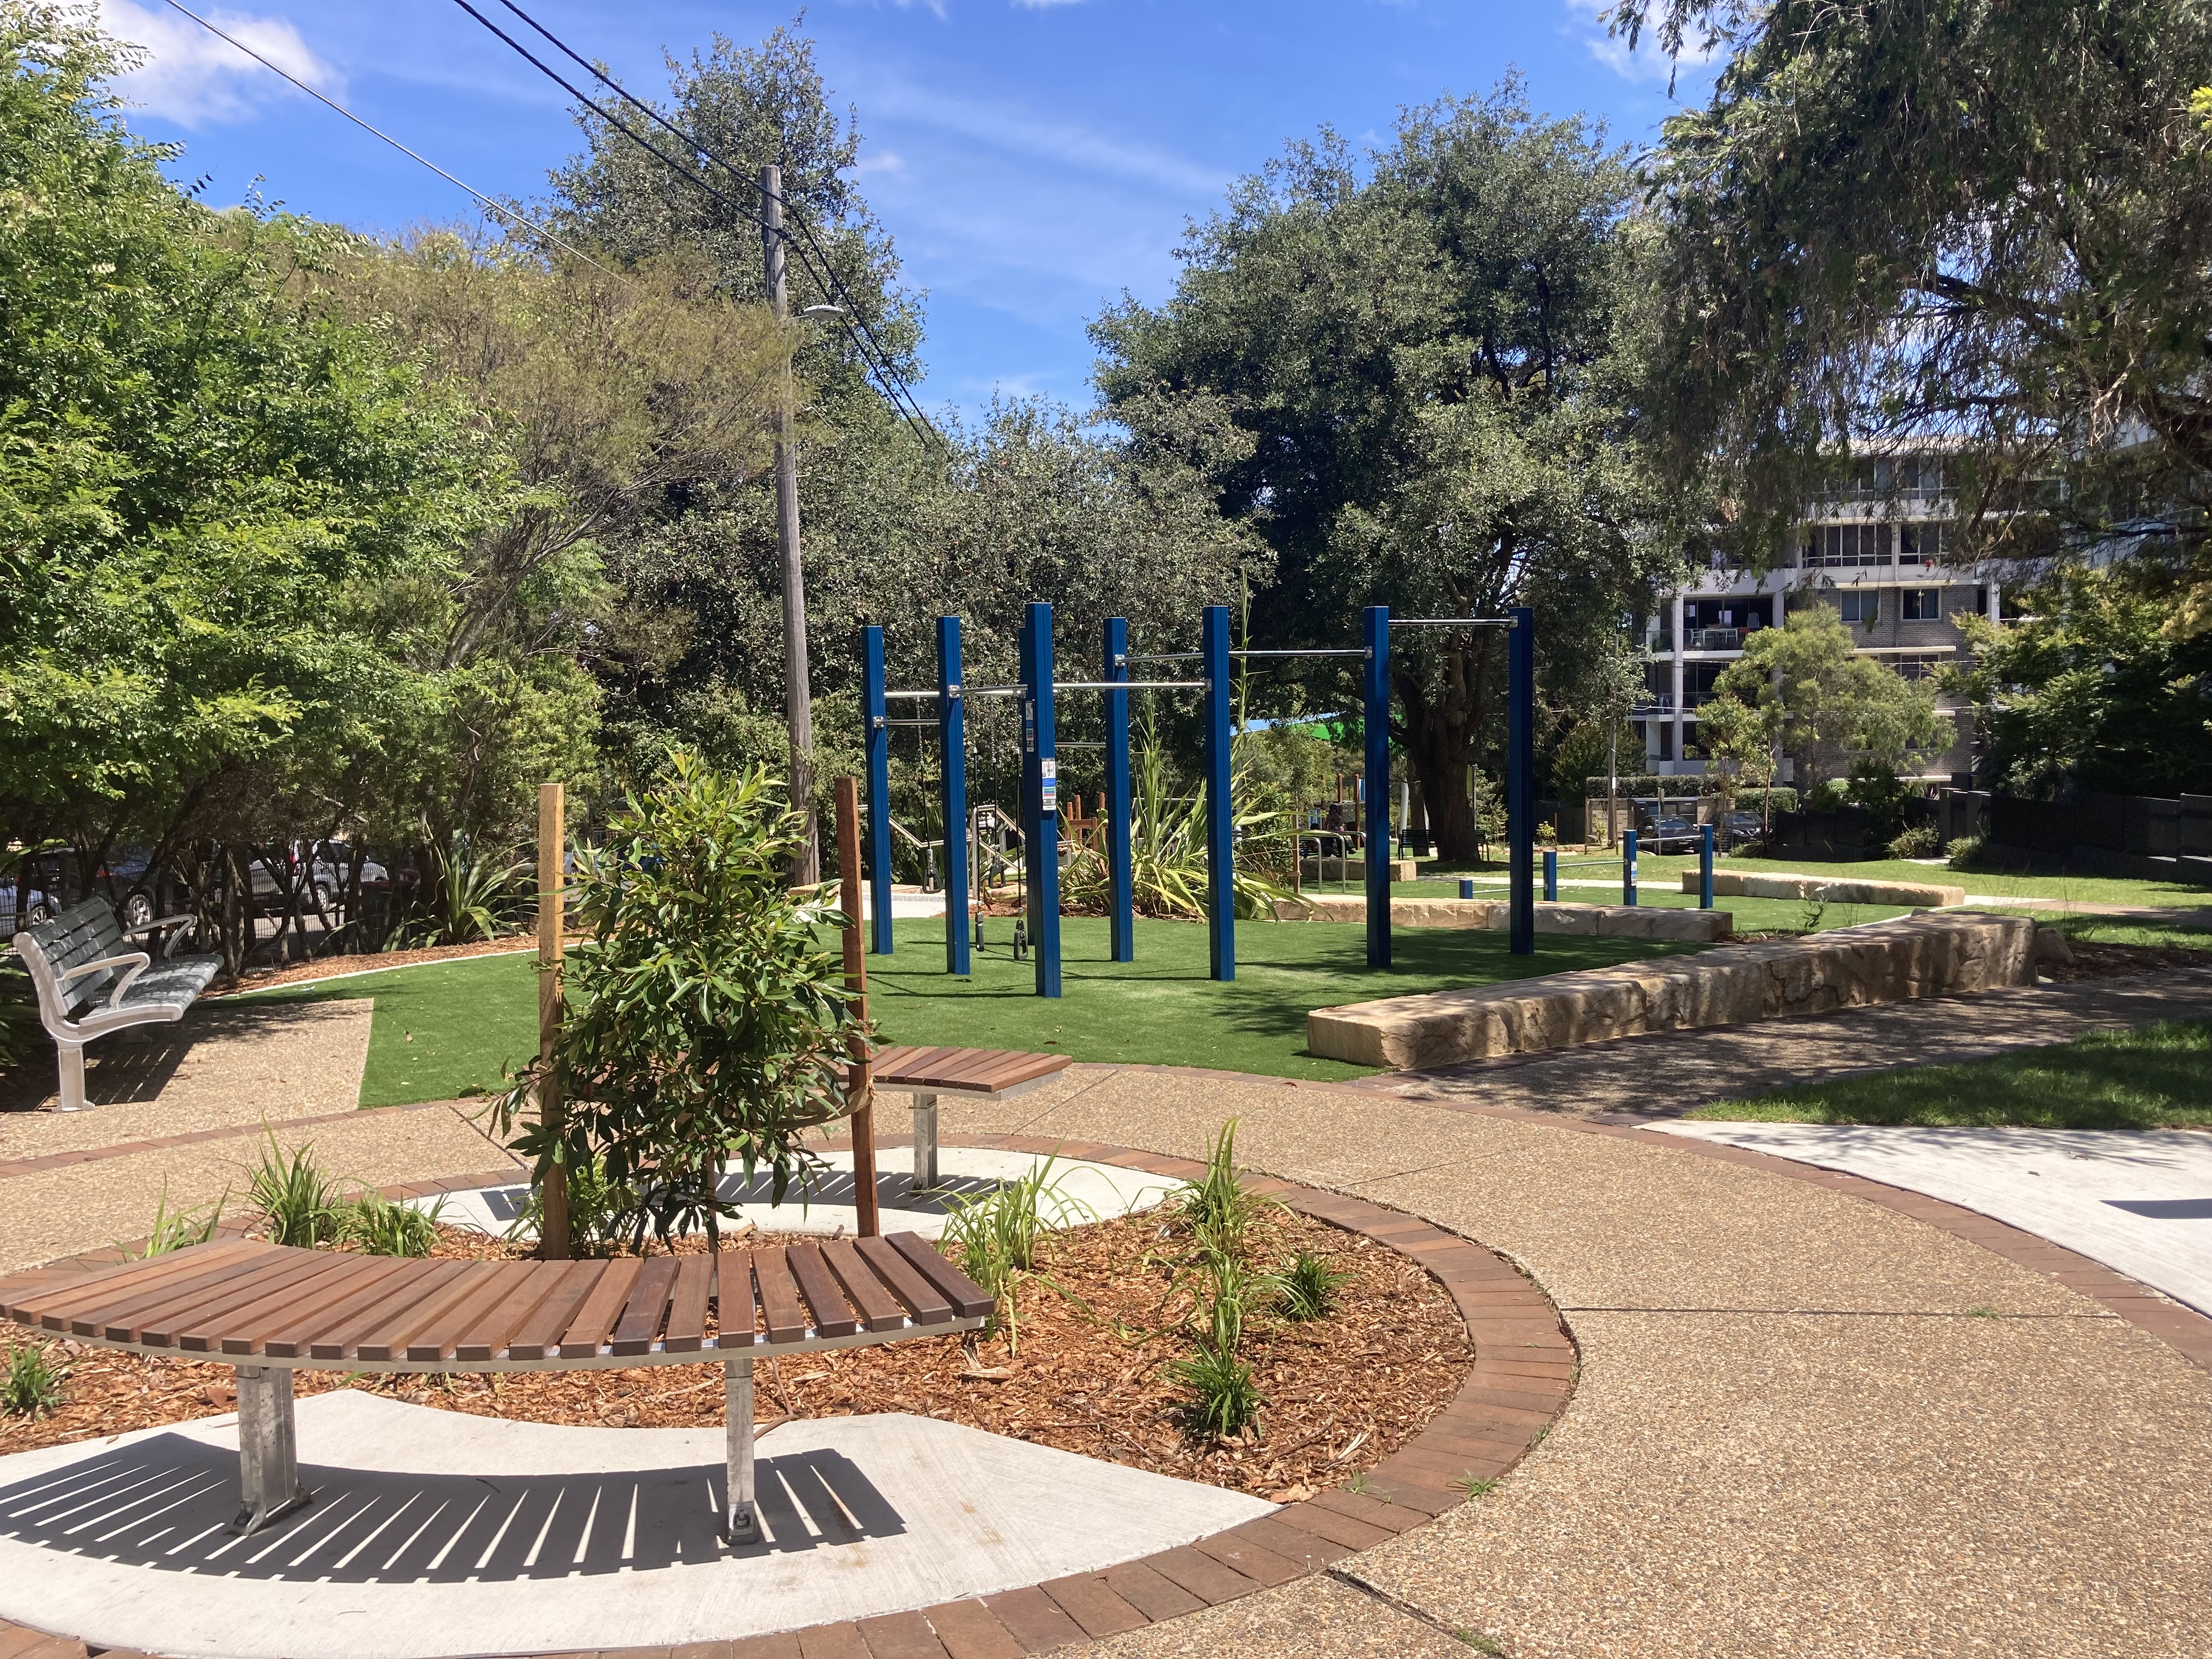 Shady park with fitness equipment and seating